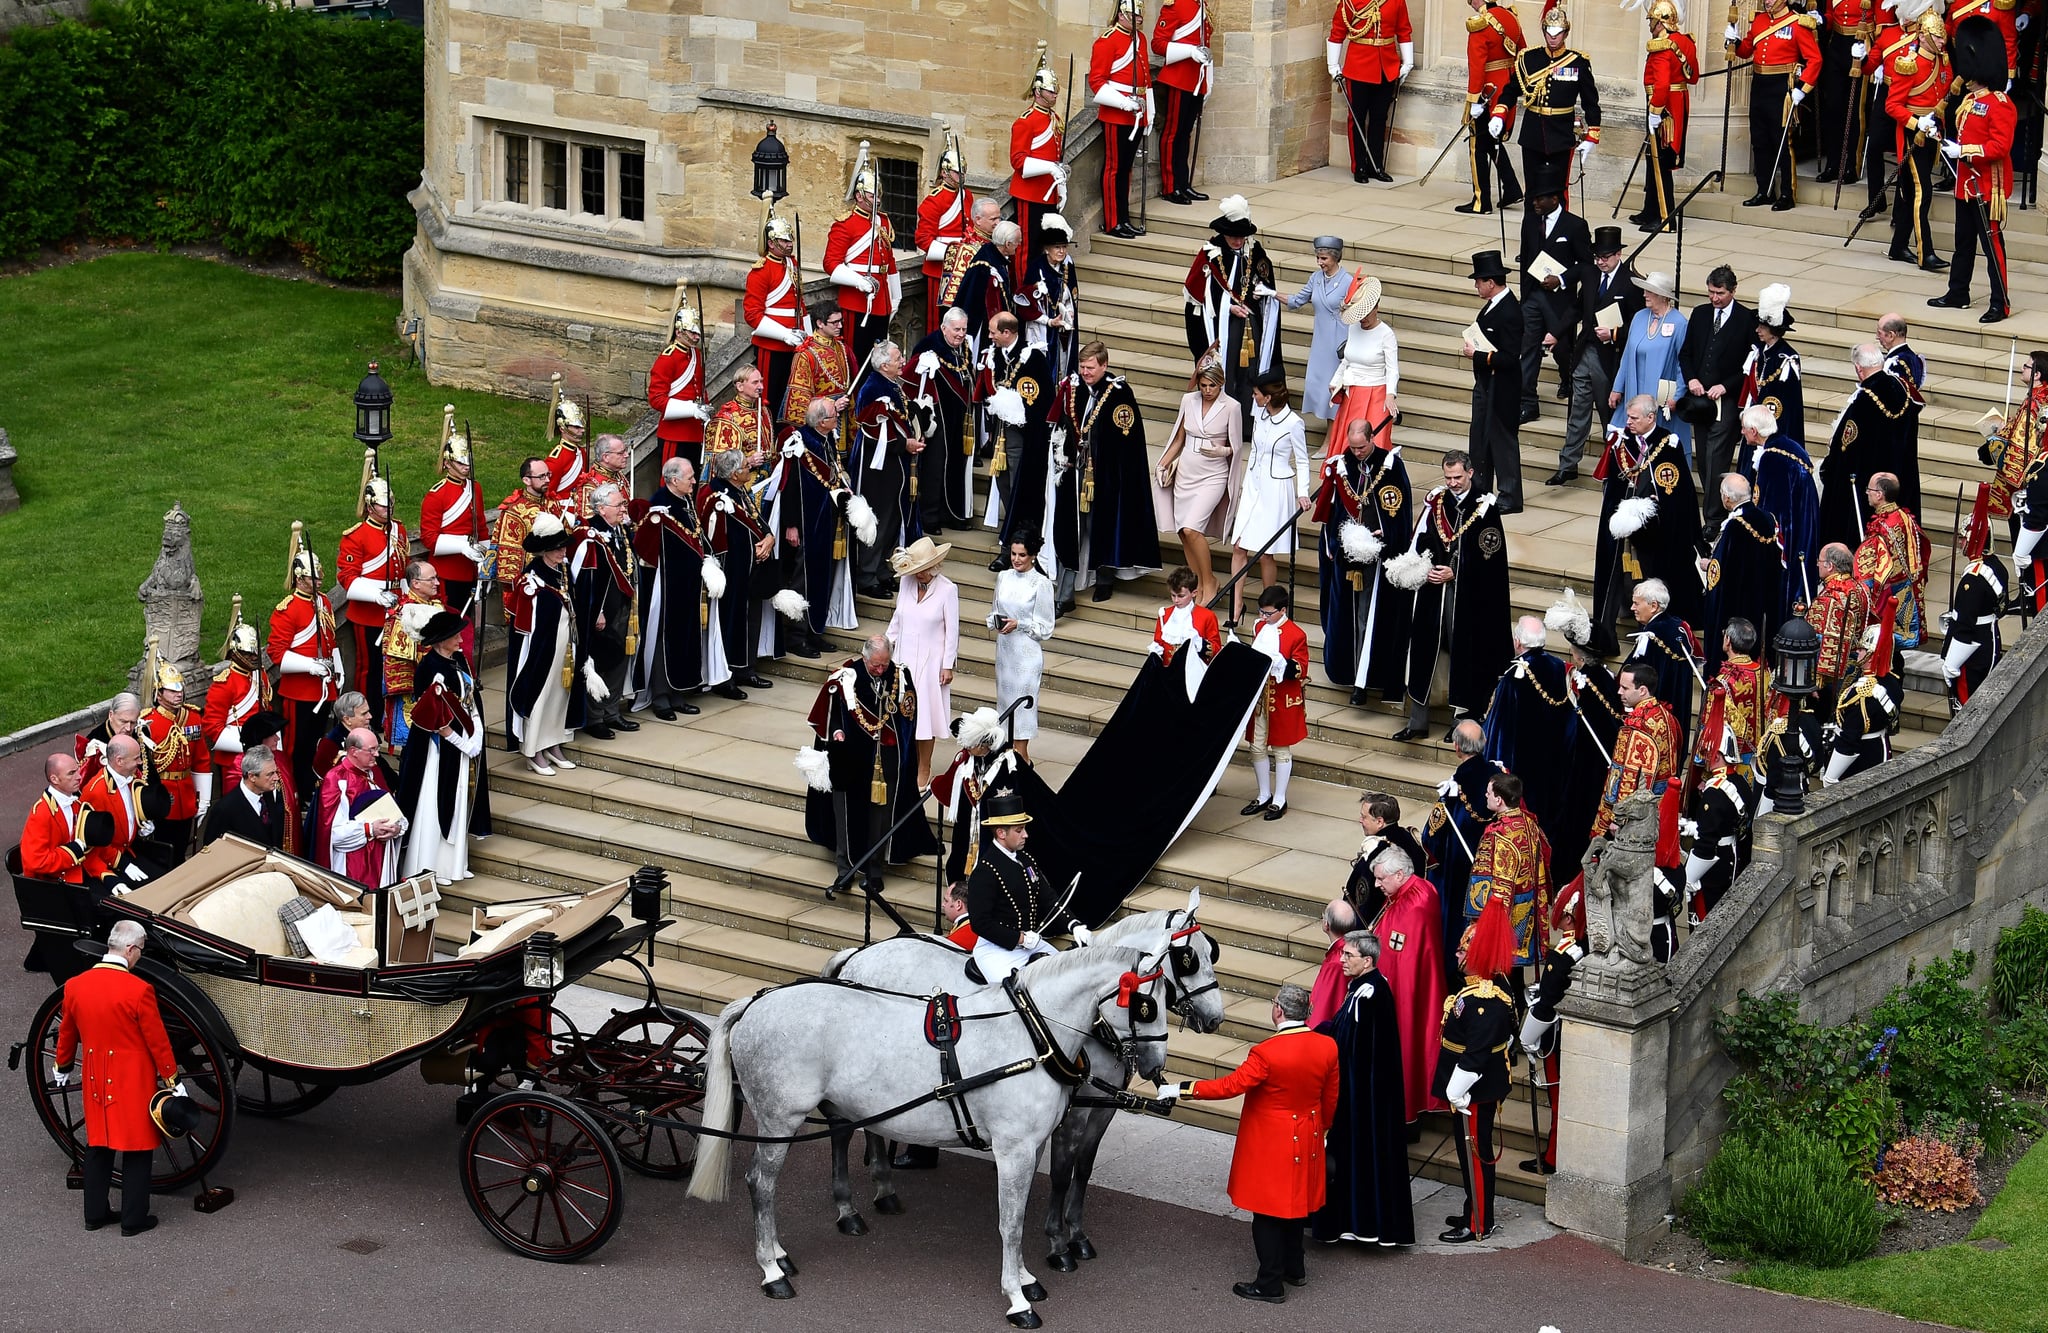 WINDSOR, ENGLAND - JUNE 17: King Willem-Alexander of the Netherlands, Queen Maxima of the Netherlands, King Felipe VI of Spain and Queen Letizia of Spain and Queen Elizabeth II leave the Order of the Garter Service on June 17, 2019 in Windsor, England. The Order of the Garter is the senior and oldest British Order of Chivalry, founded by Edward III in 1348. The Garter ceremonial dates from 1948, when formal installation was revived by King George VI for the first time since 1805. (Photo by Ben Stansall - WPA Pool/Getty Images)